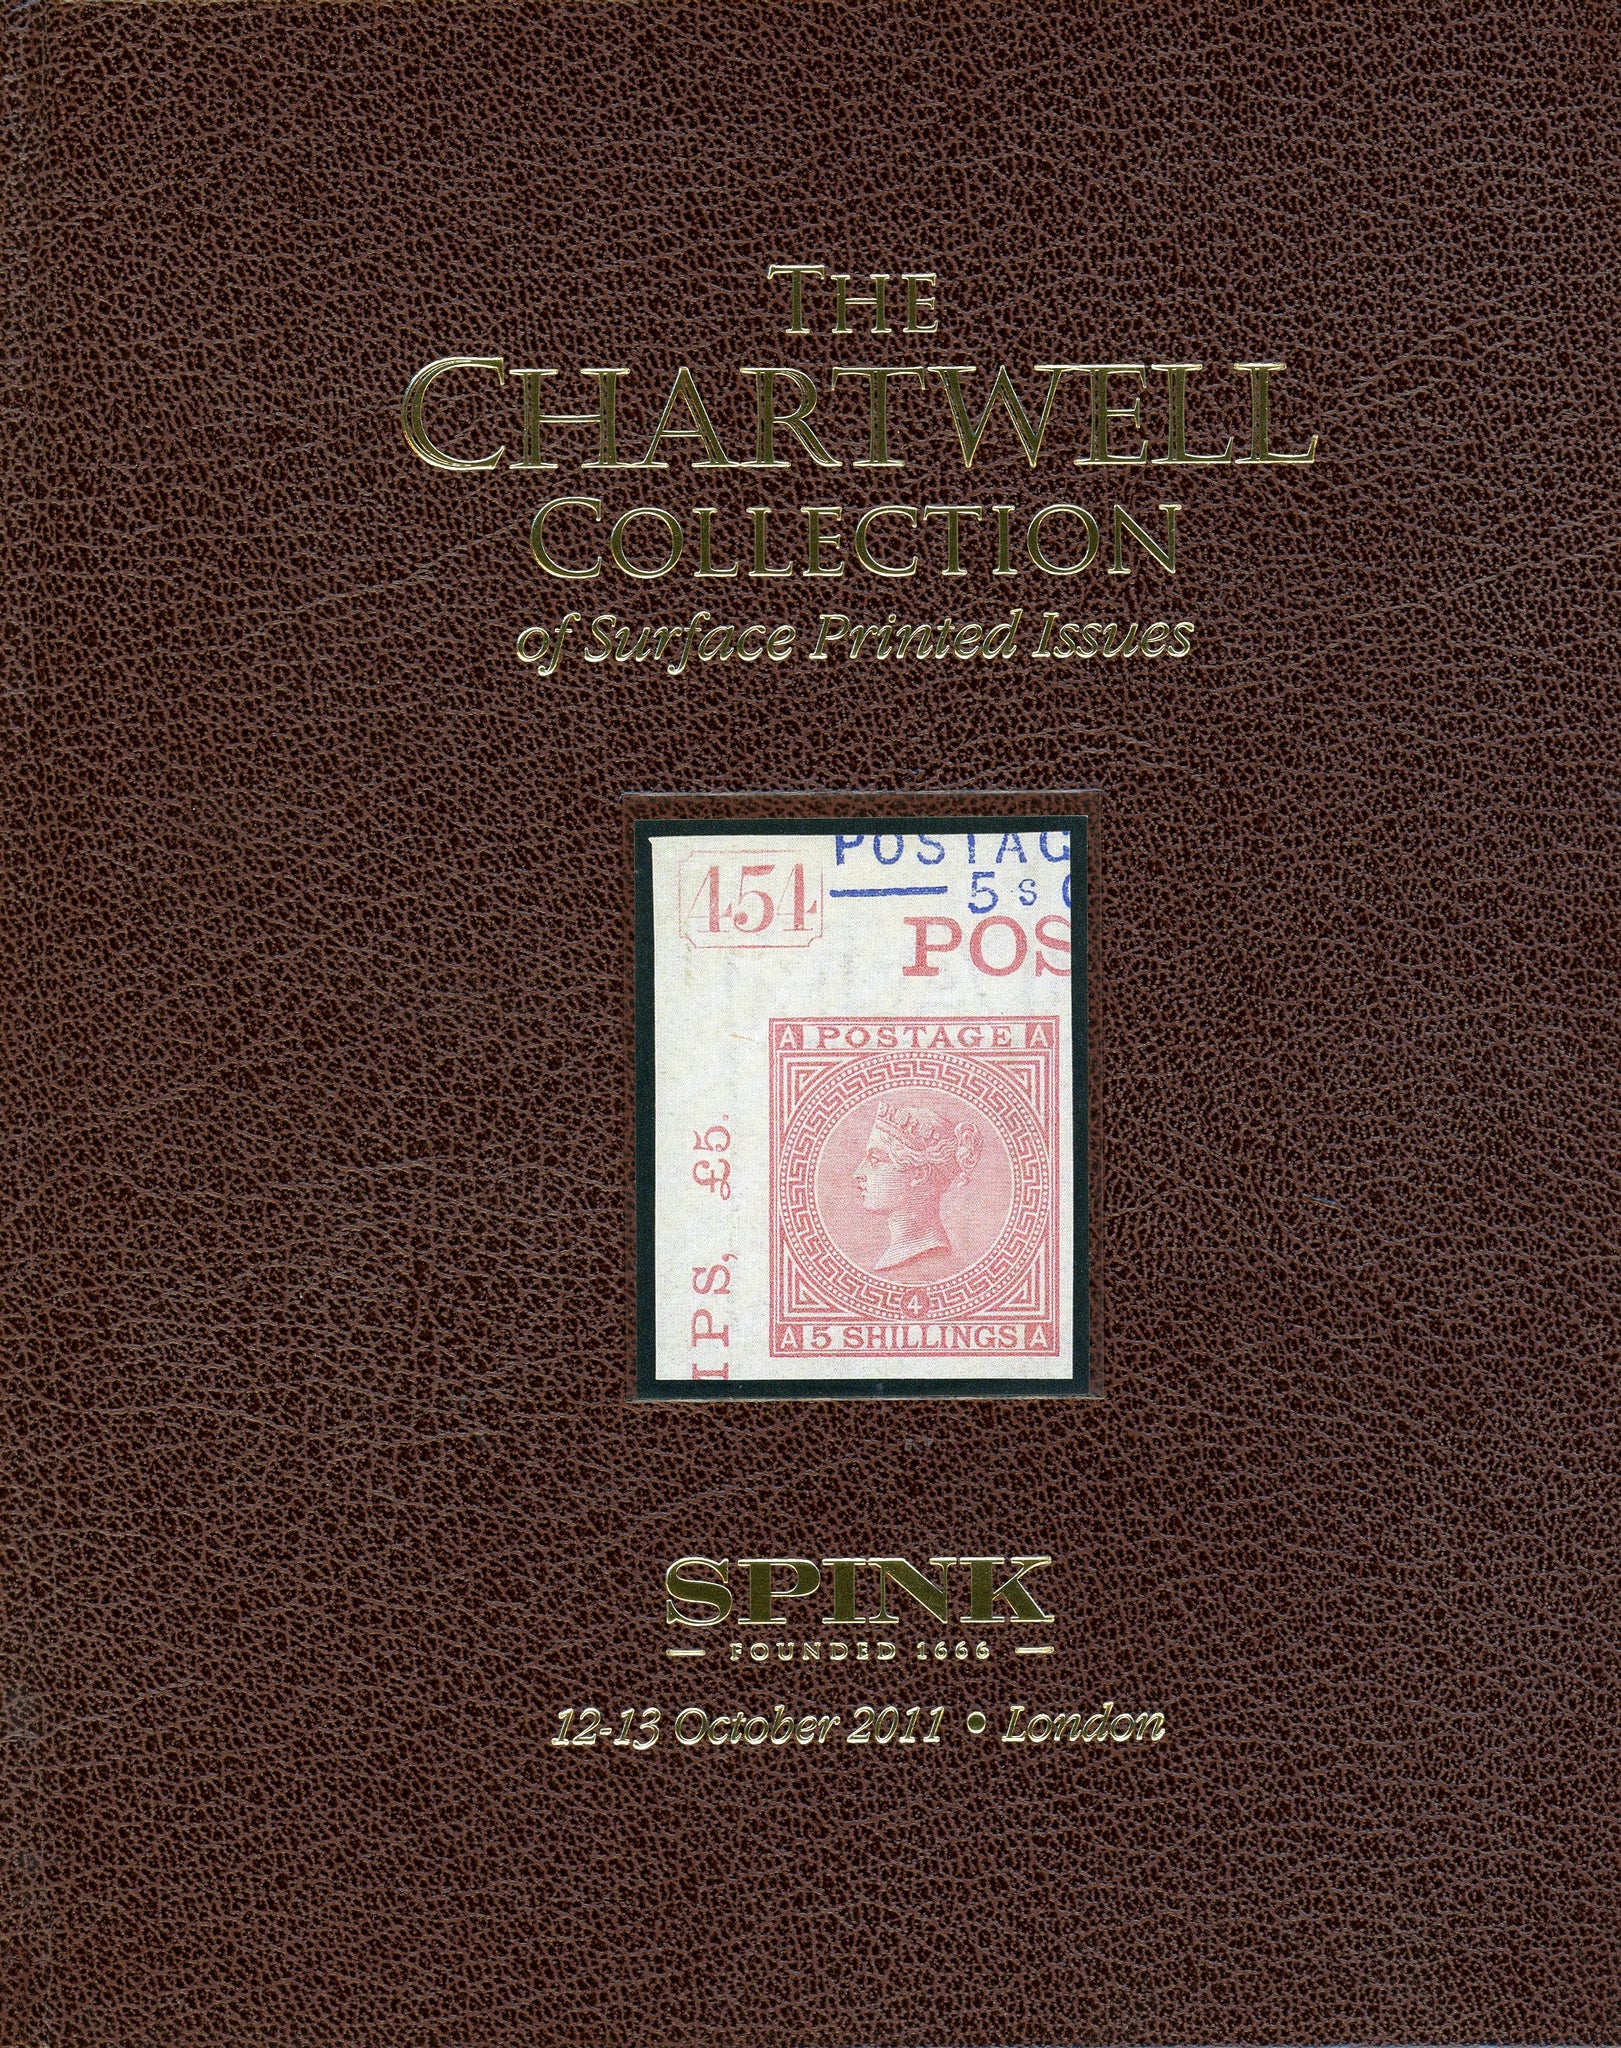 The Chartwell Collection of Surface Printed Issues Vol 3 - 12-13 October 2011 Spink London